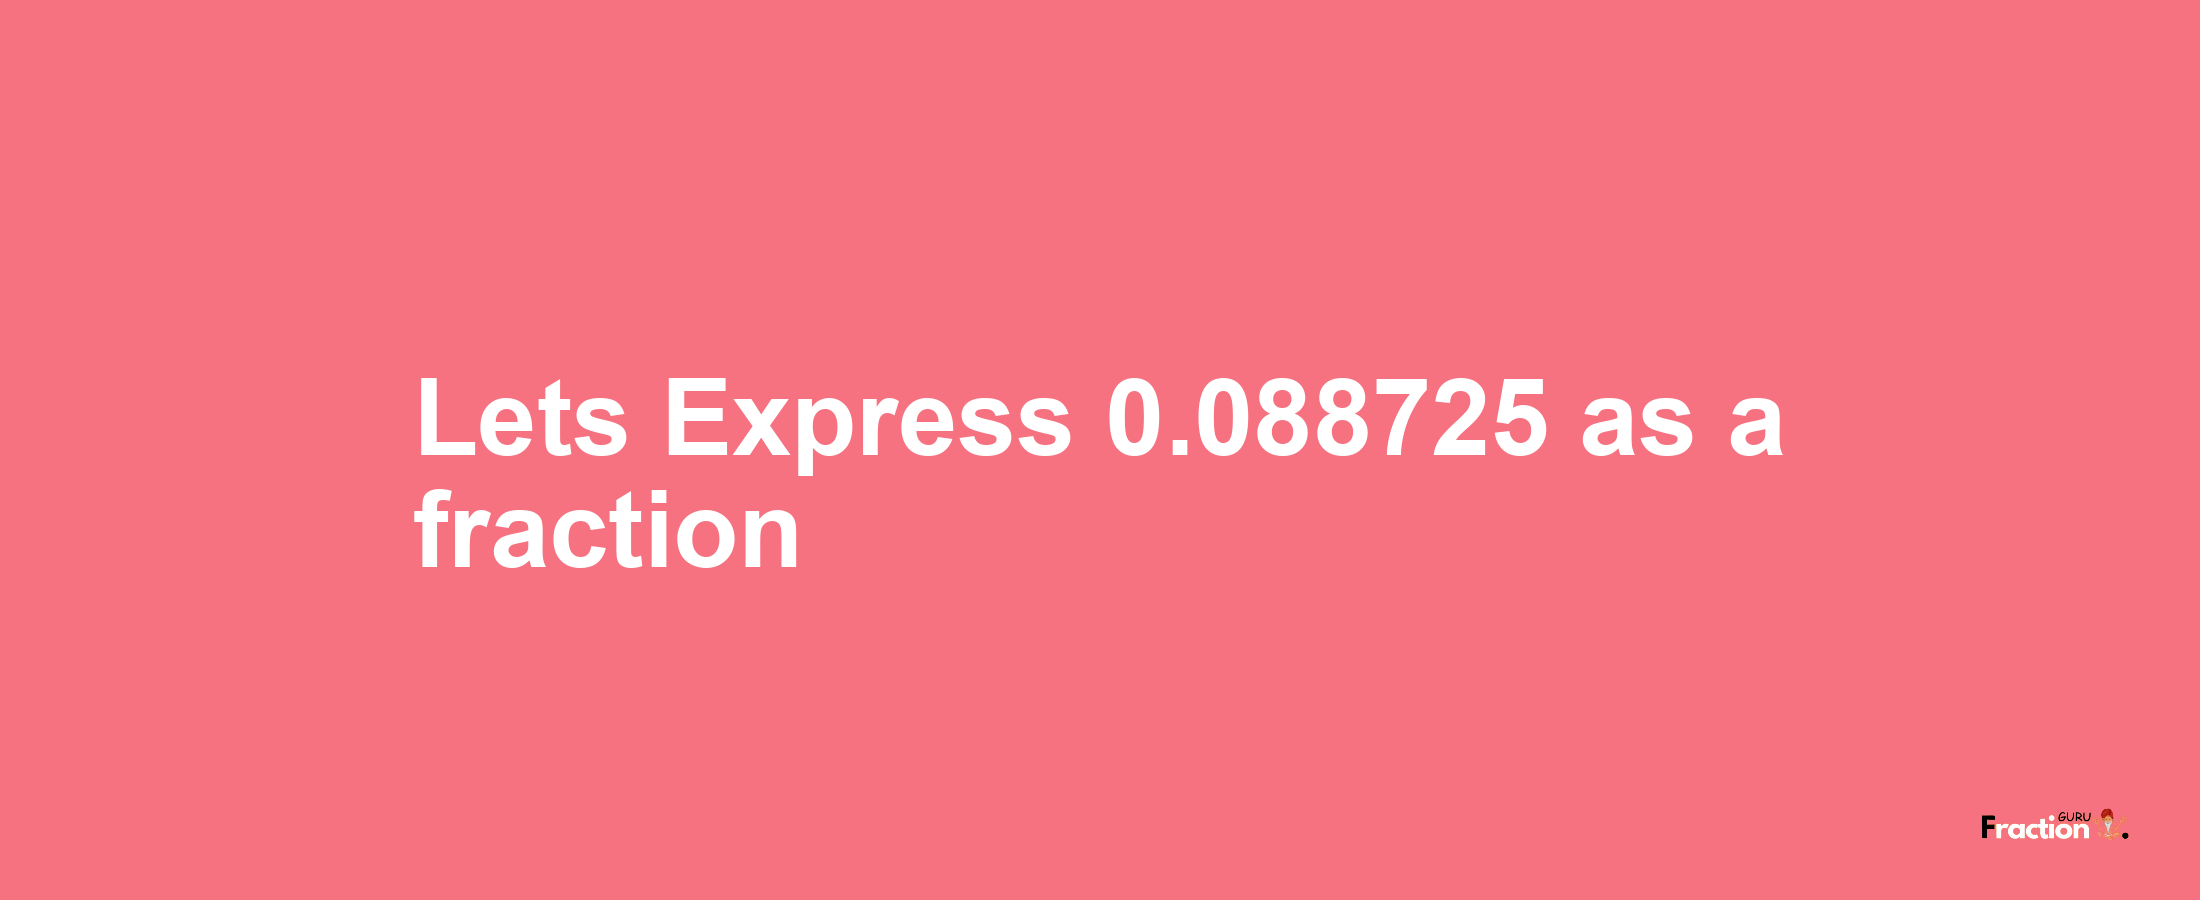 Lets Express 0.088725 as afraction